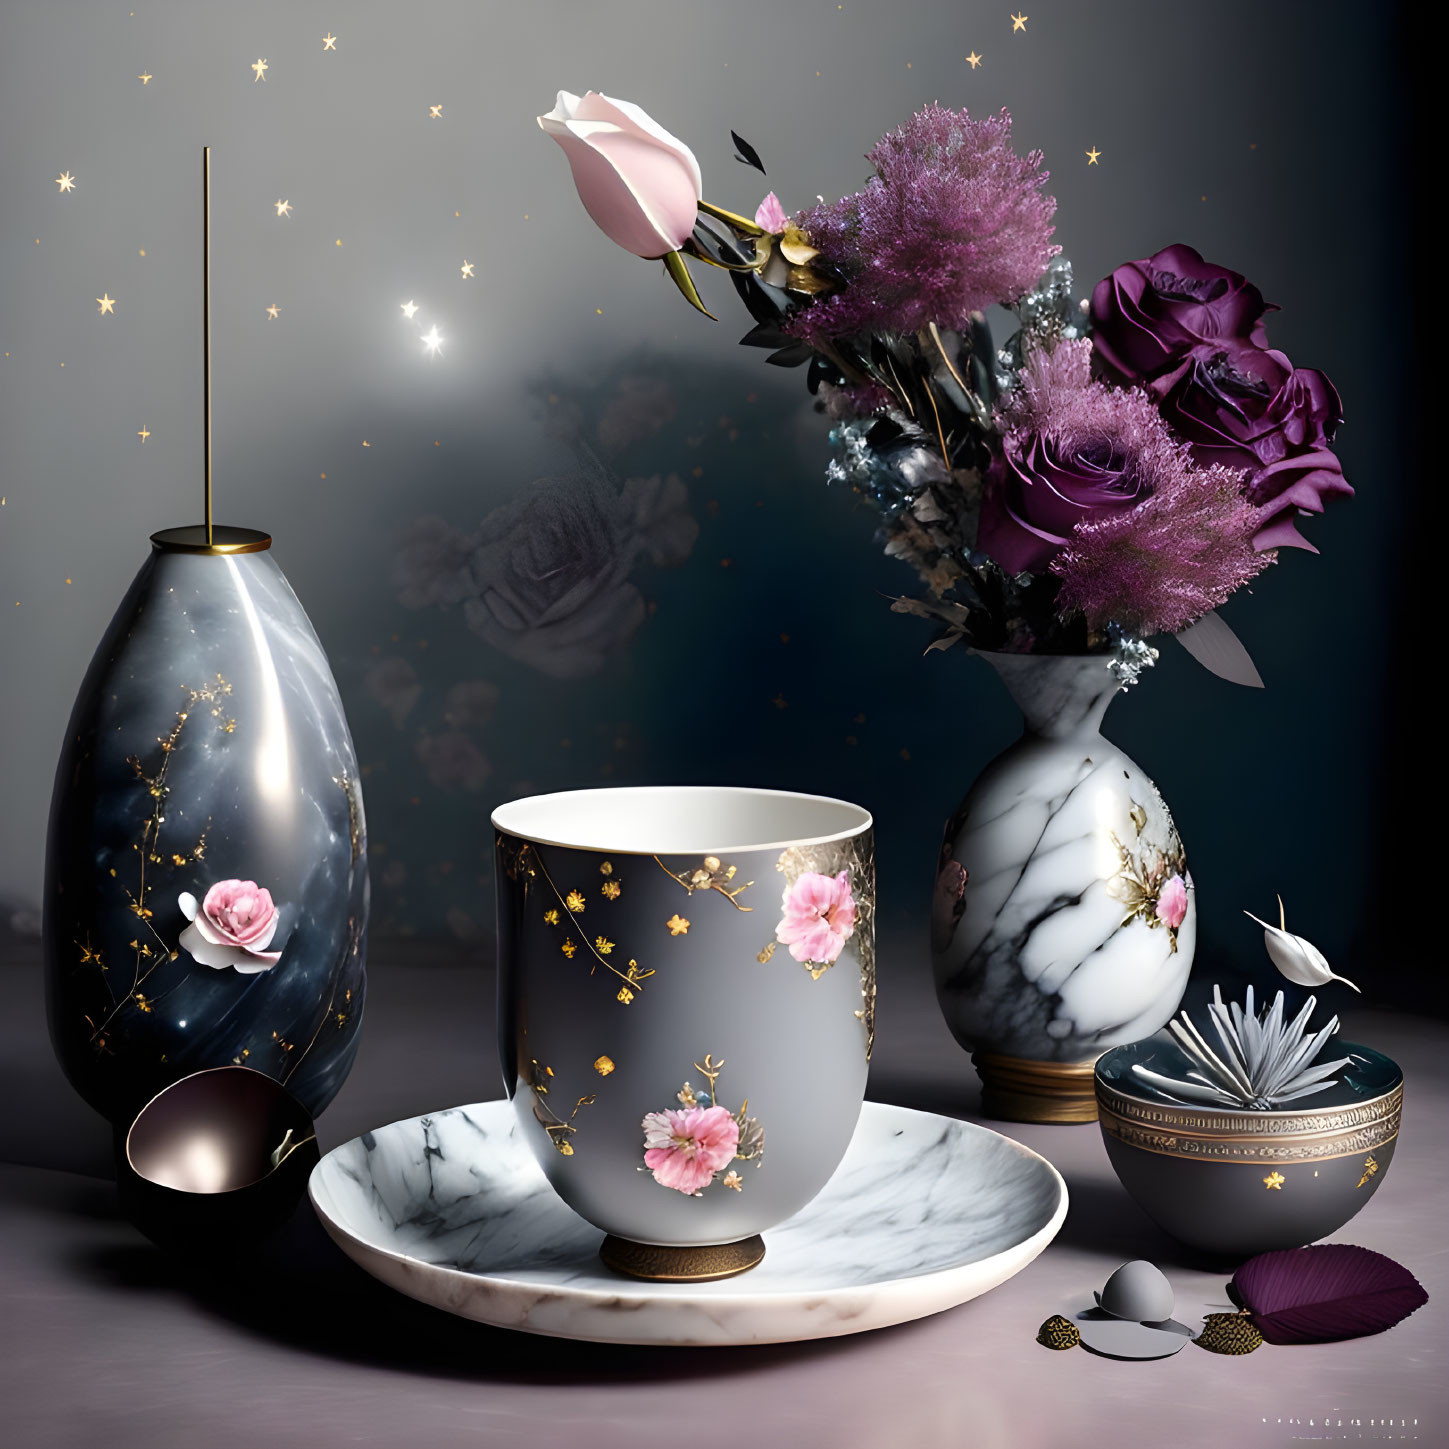 Floral and Starry Motif Homeware Collection on Dark Background